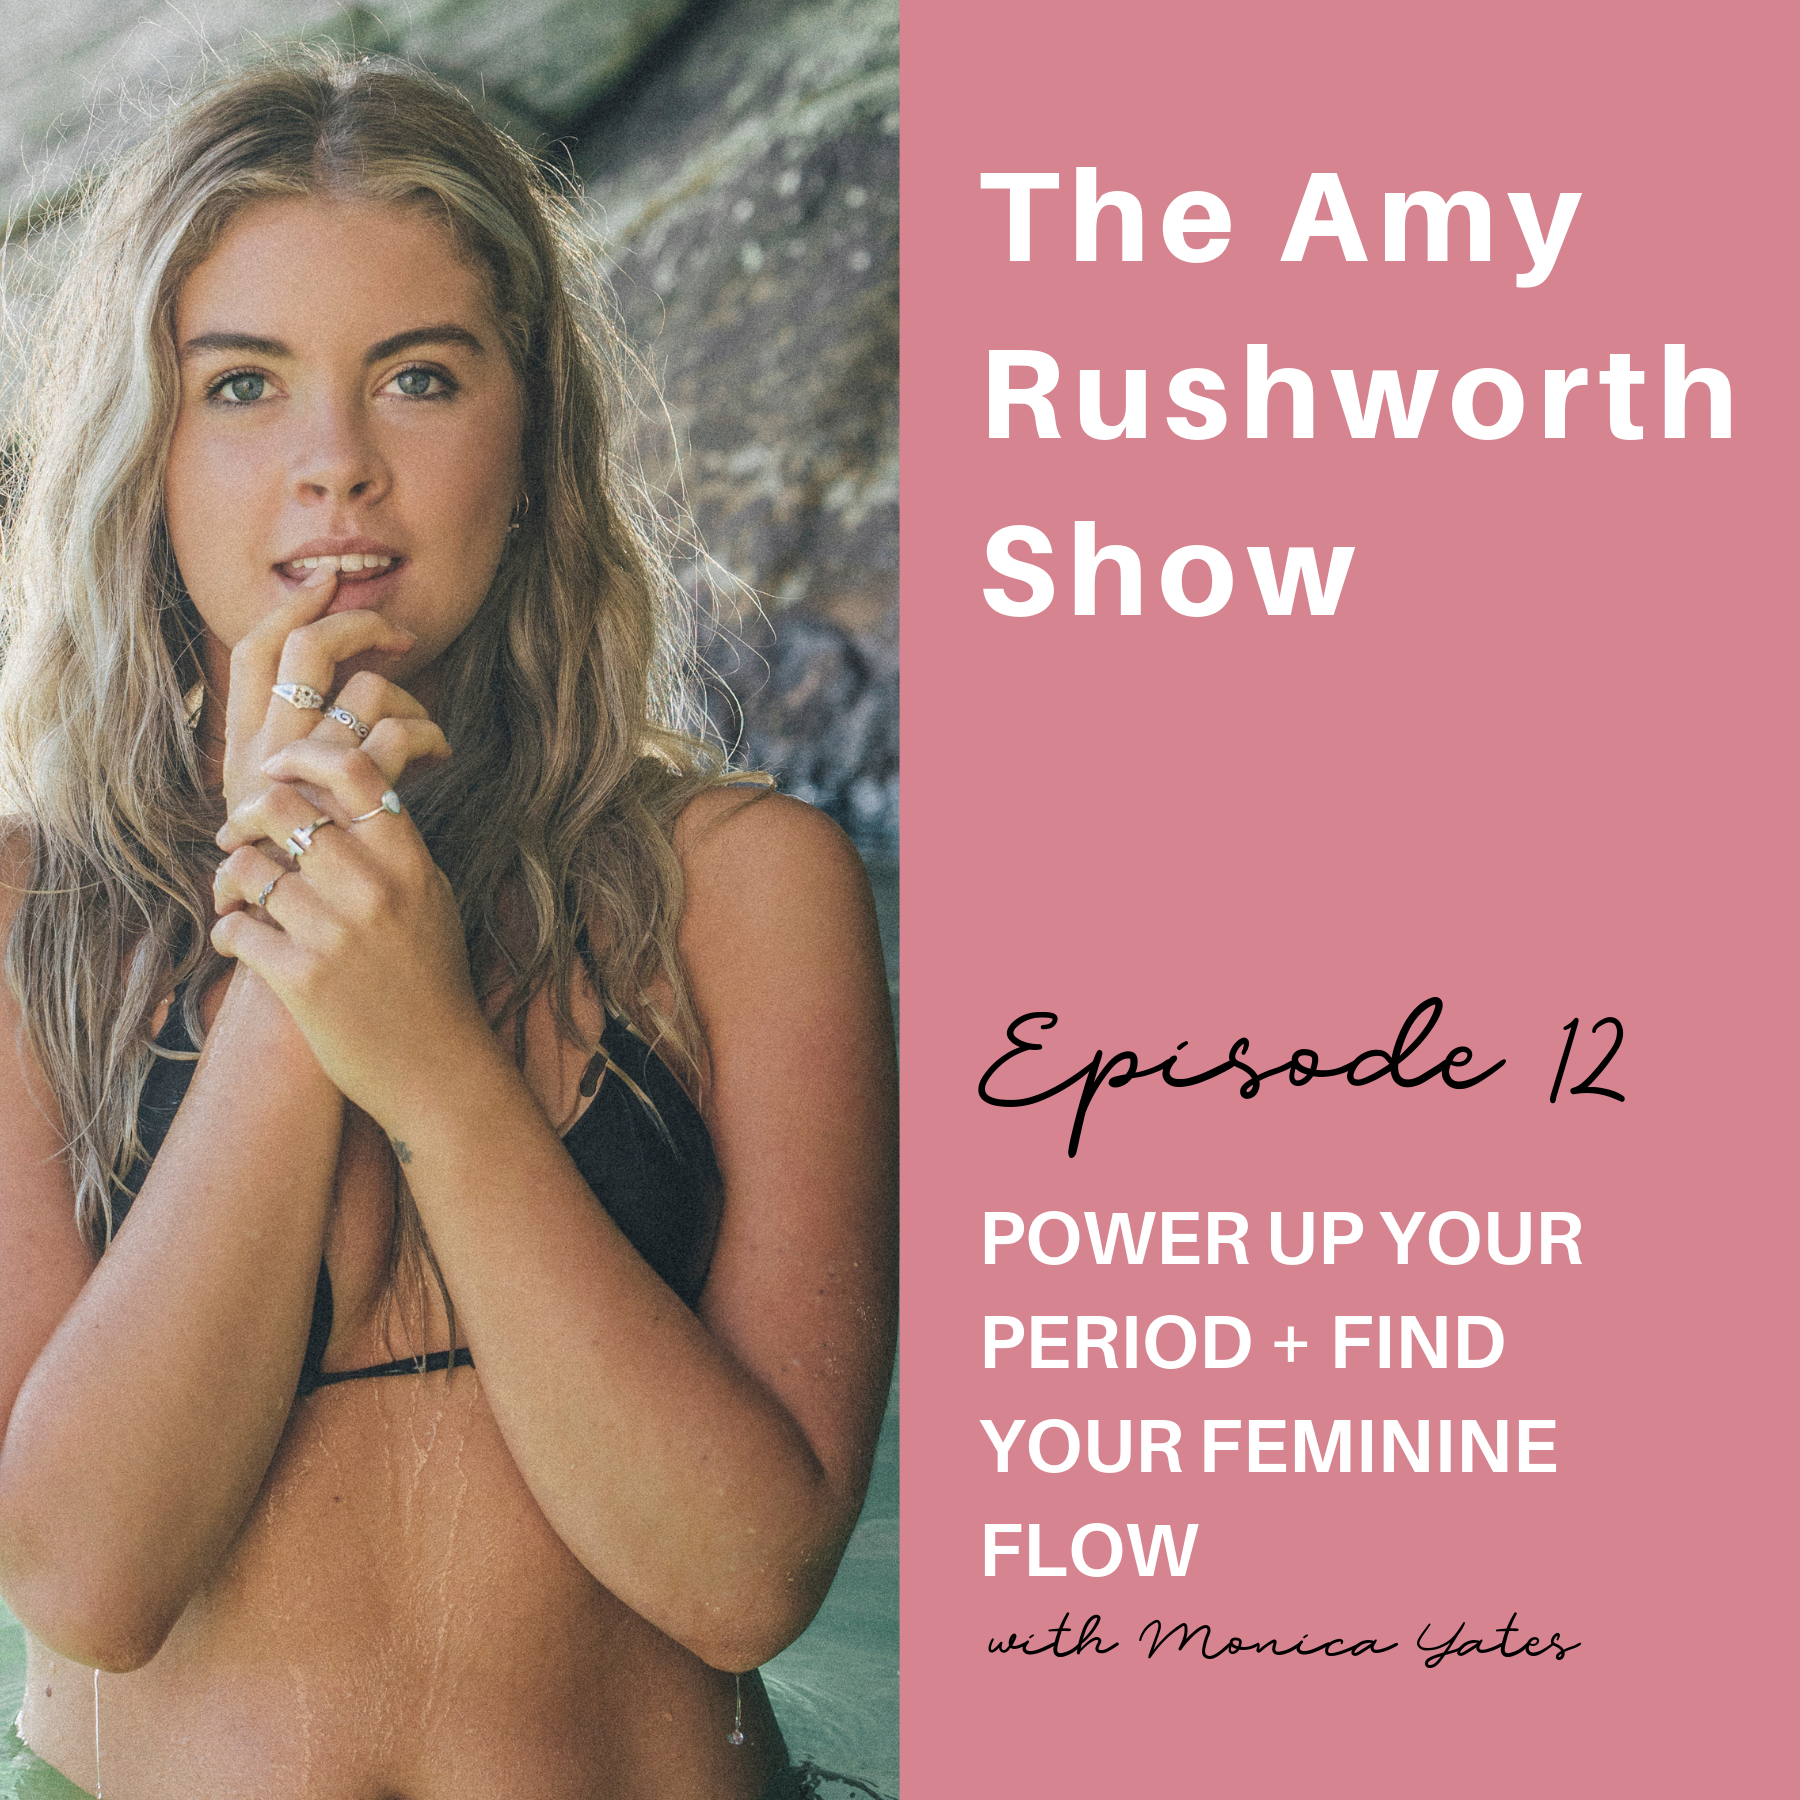 Episode 12: Power Up Your Period + Find Your Feminine Flow with Monica Yates